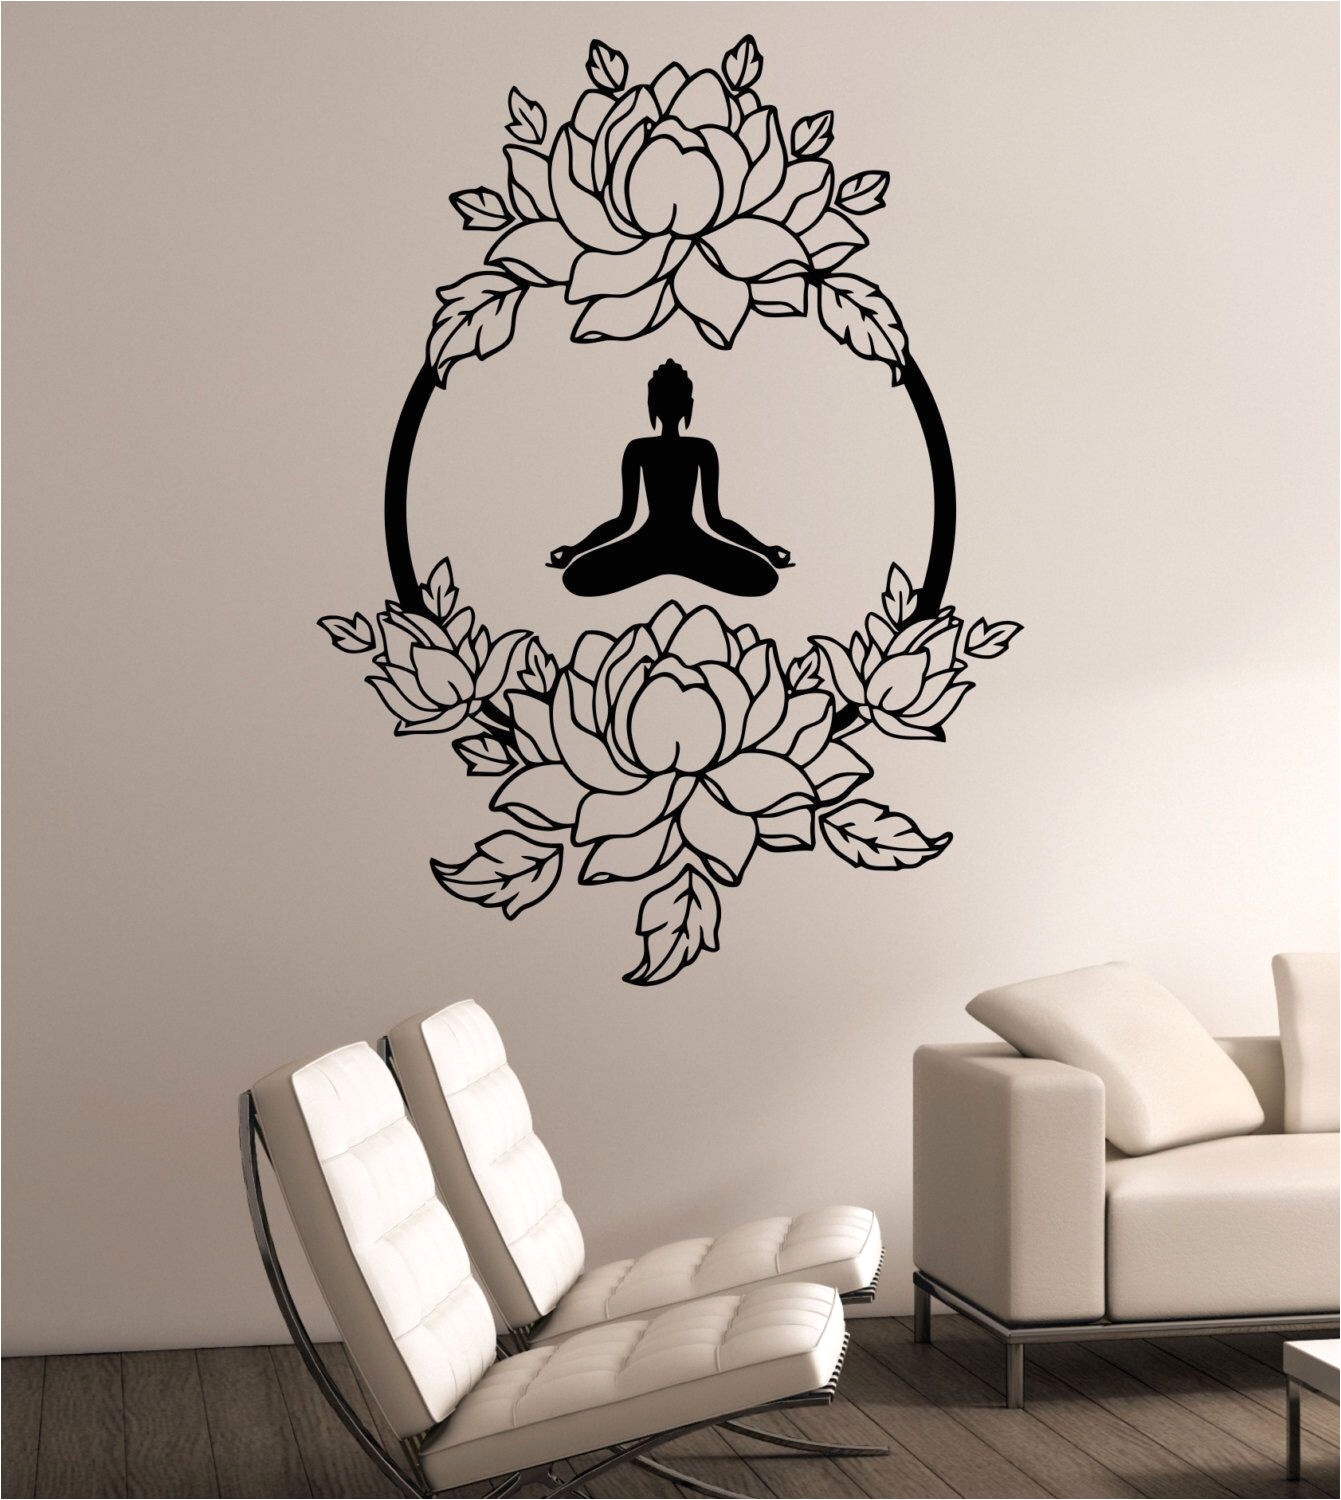 wall decal luxury 1 kirkland wall decor home design 0d outdoor awesome metal mirror wall decor